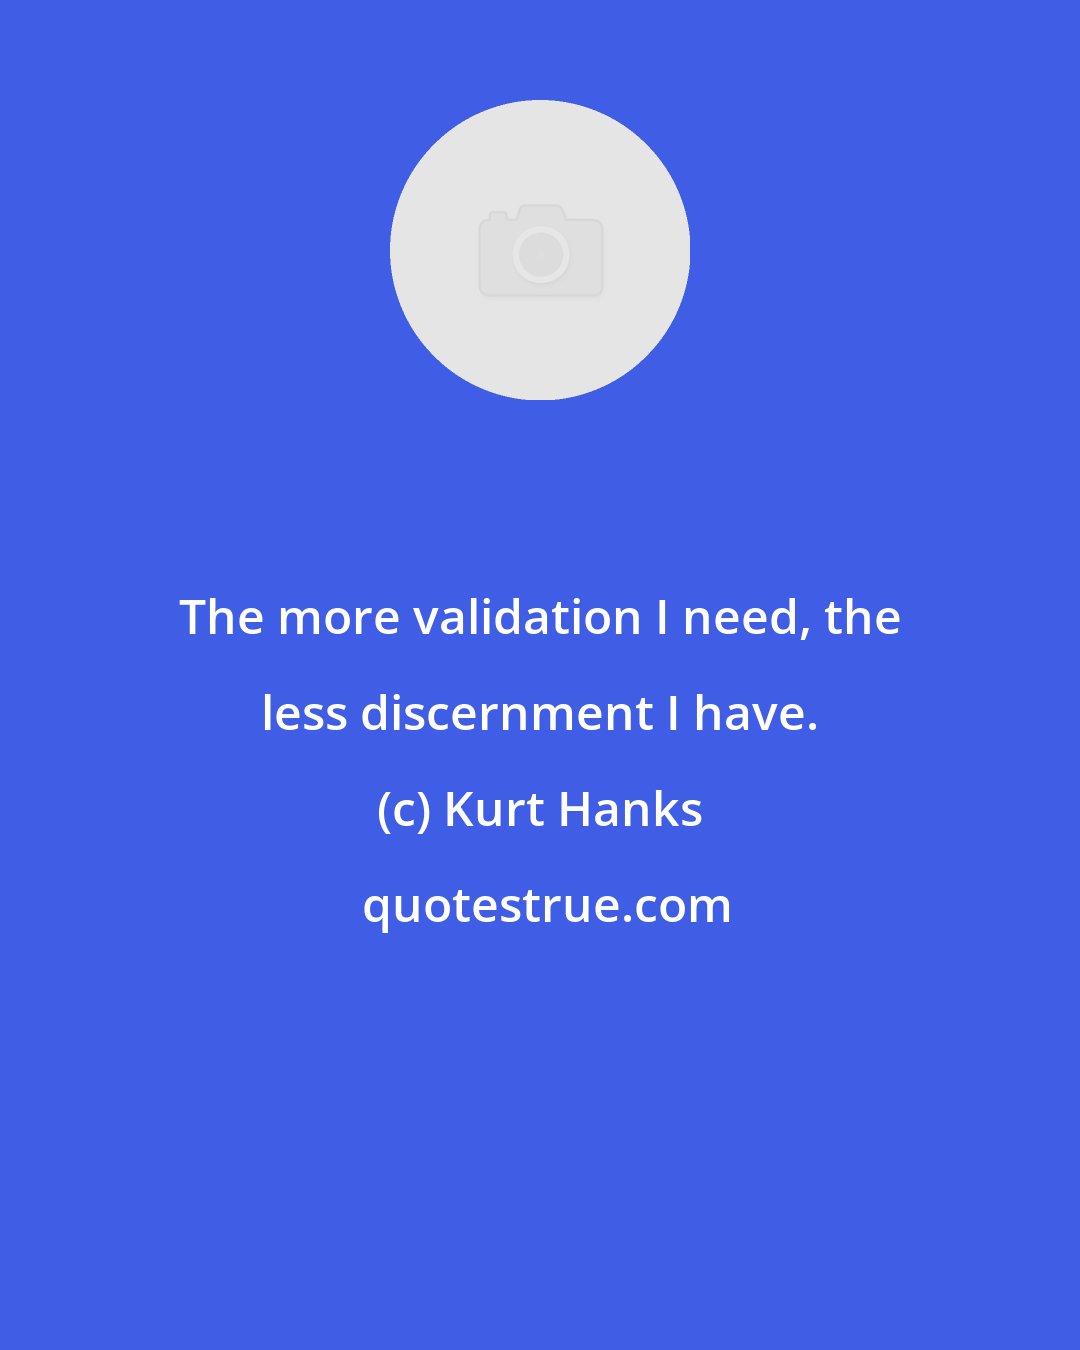 Kurt Hanks: The more validation I need, the less discernment I have.